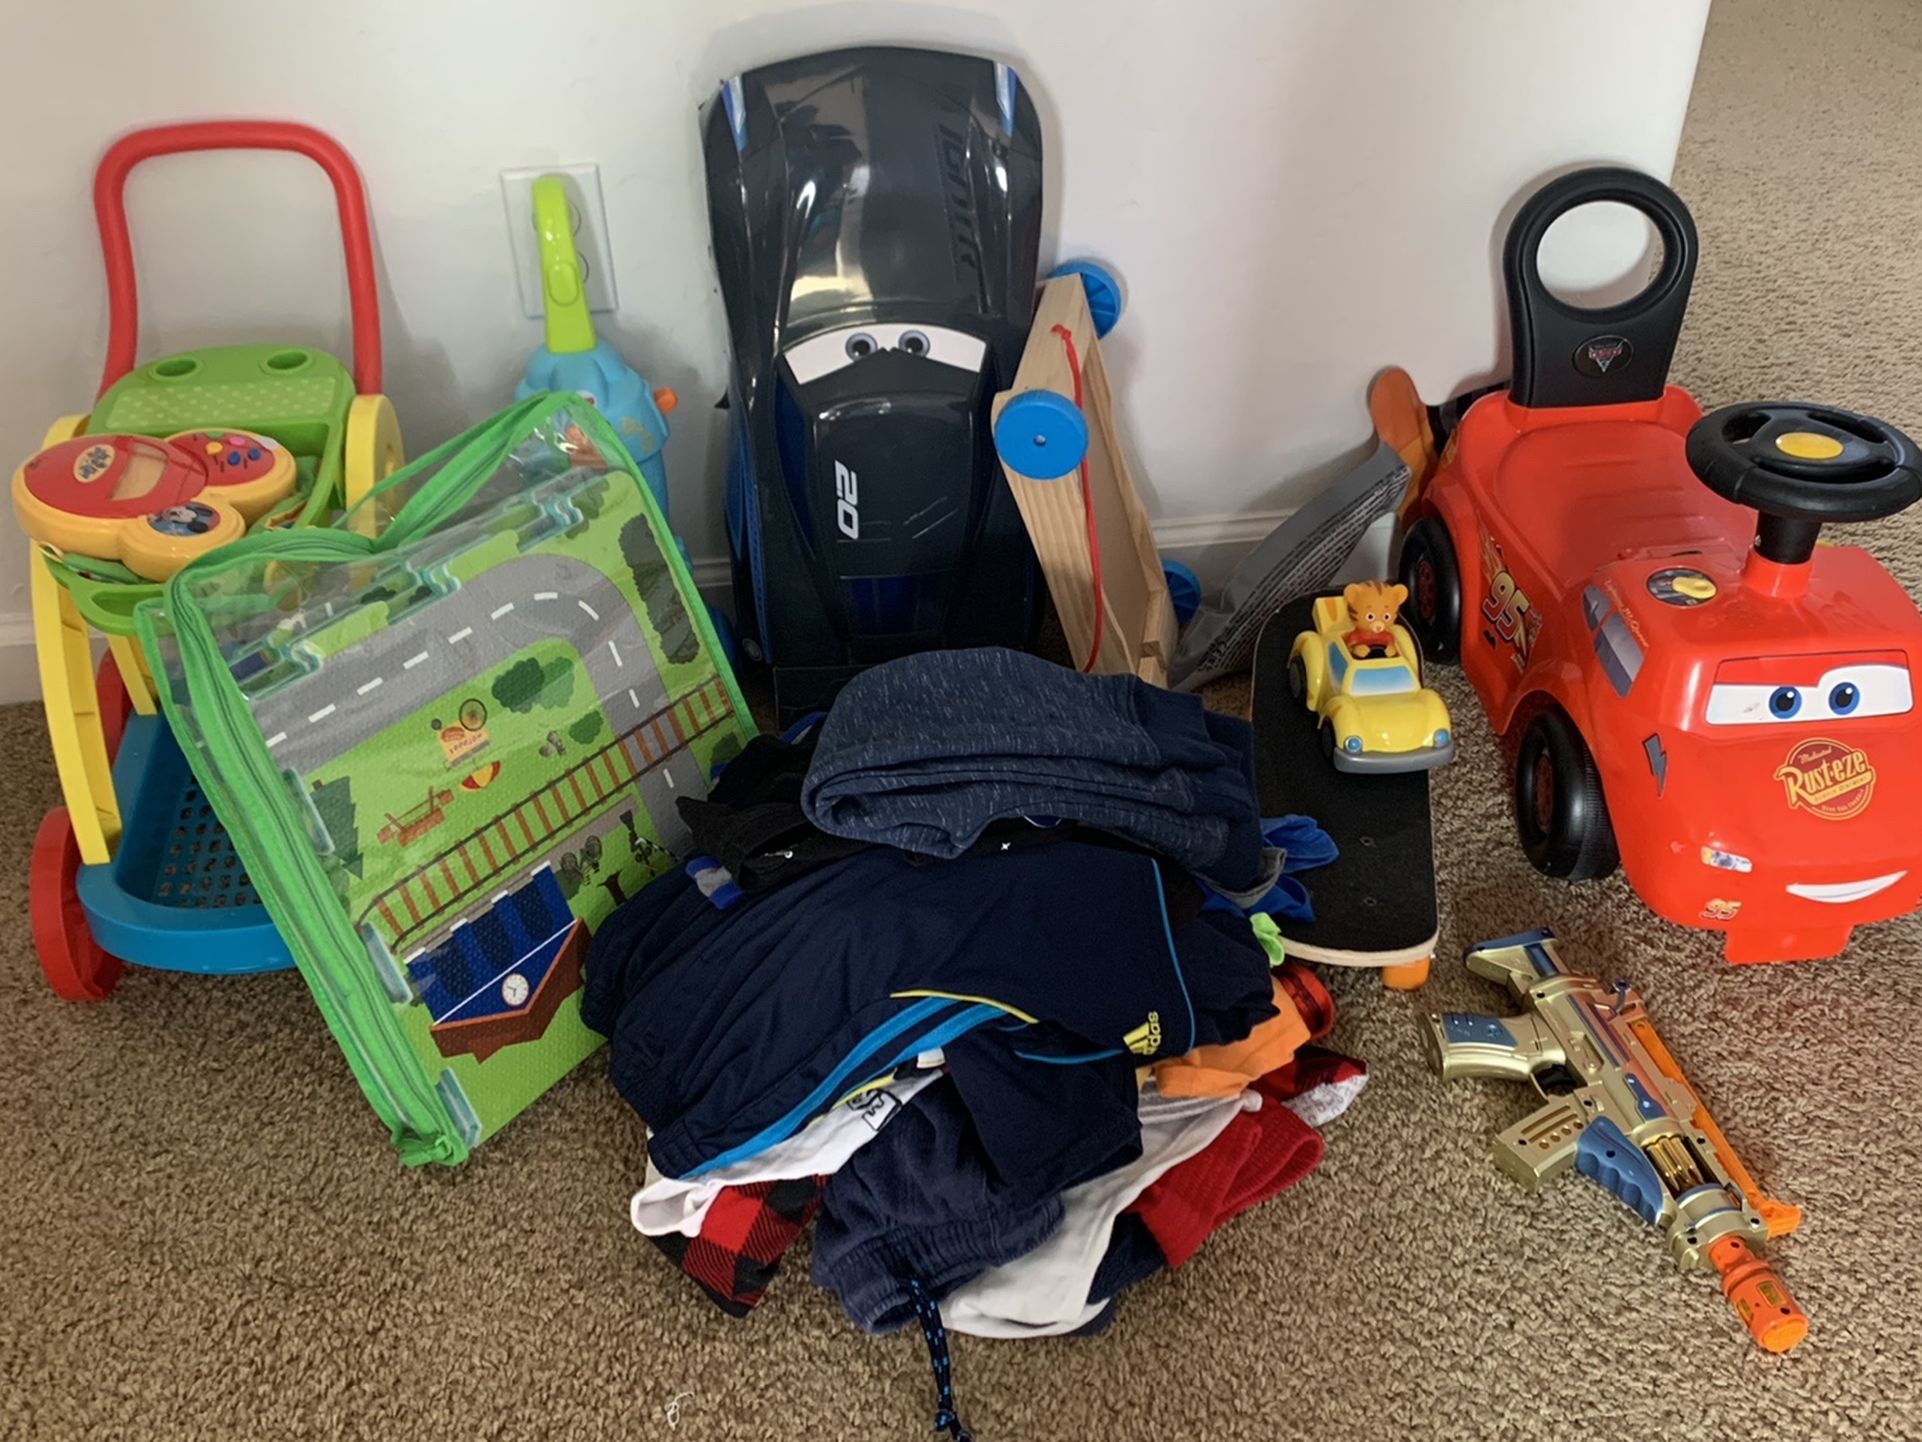 Boys Clothes, Toys, And Cars